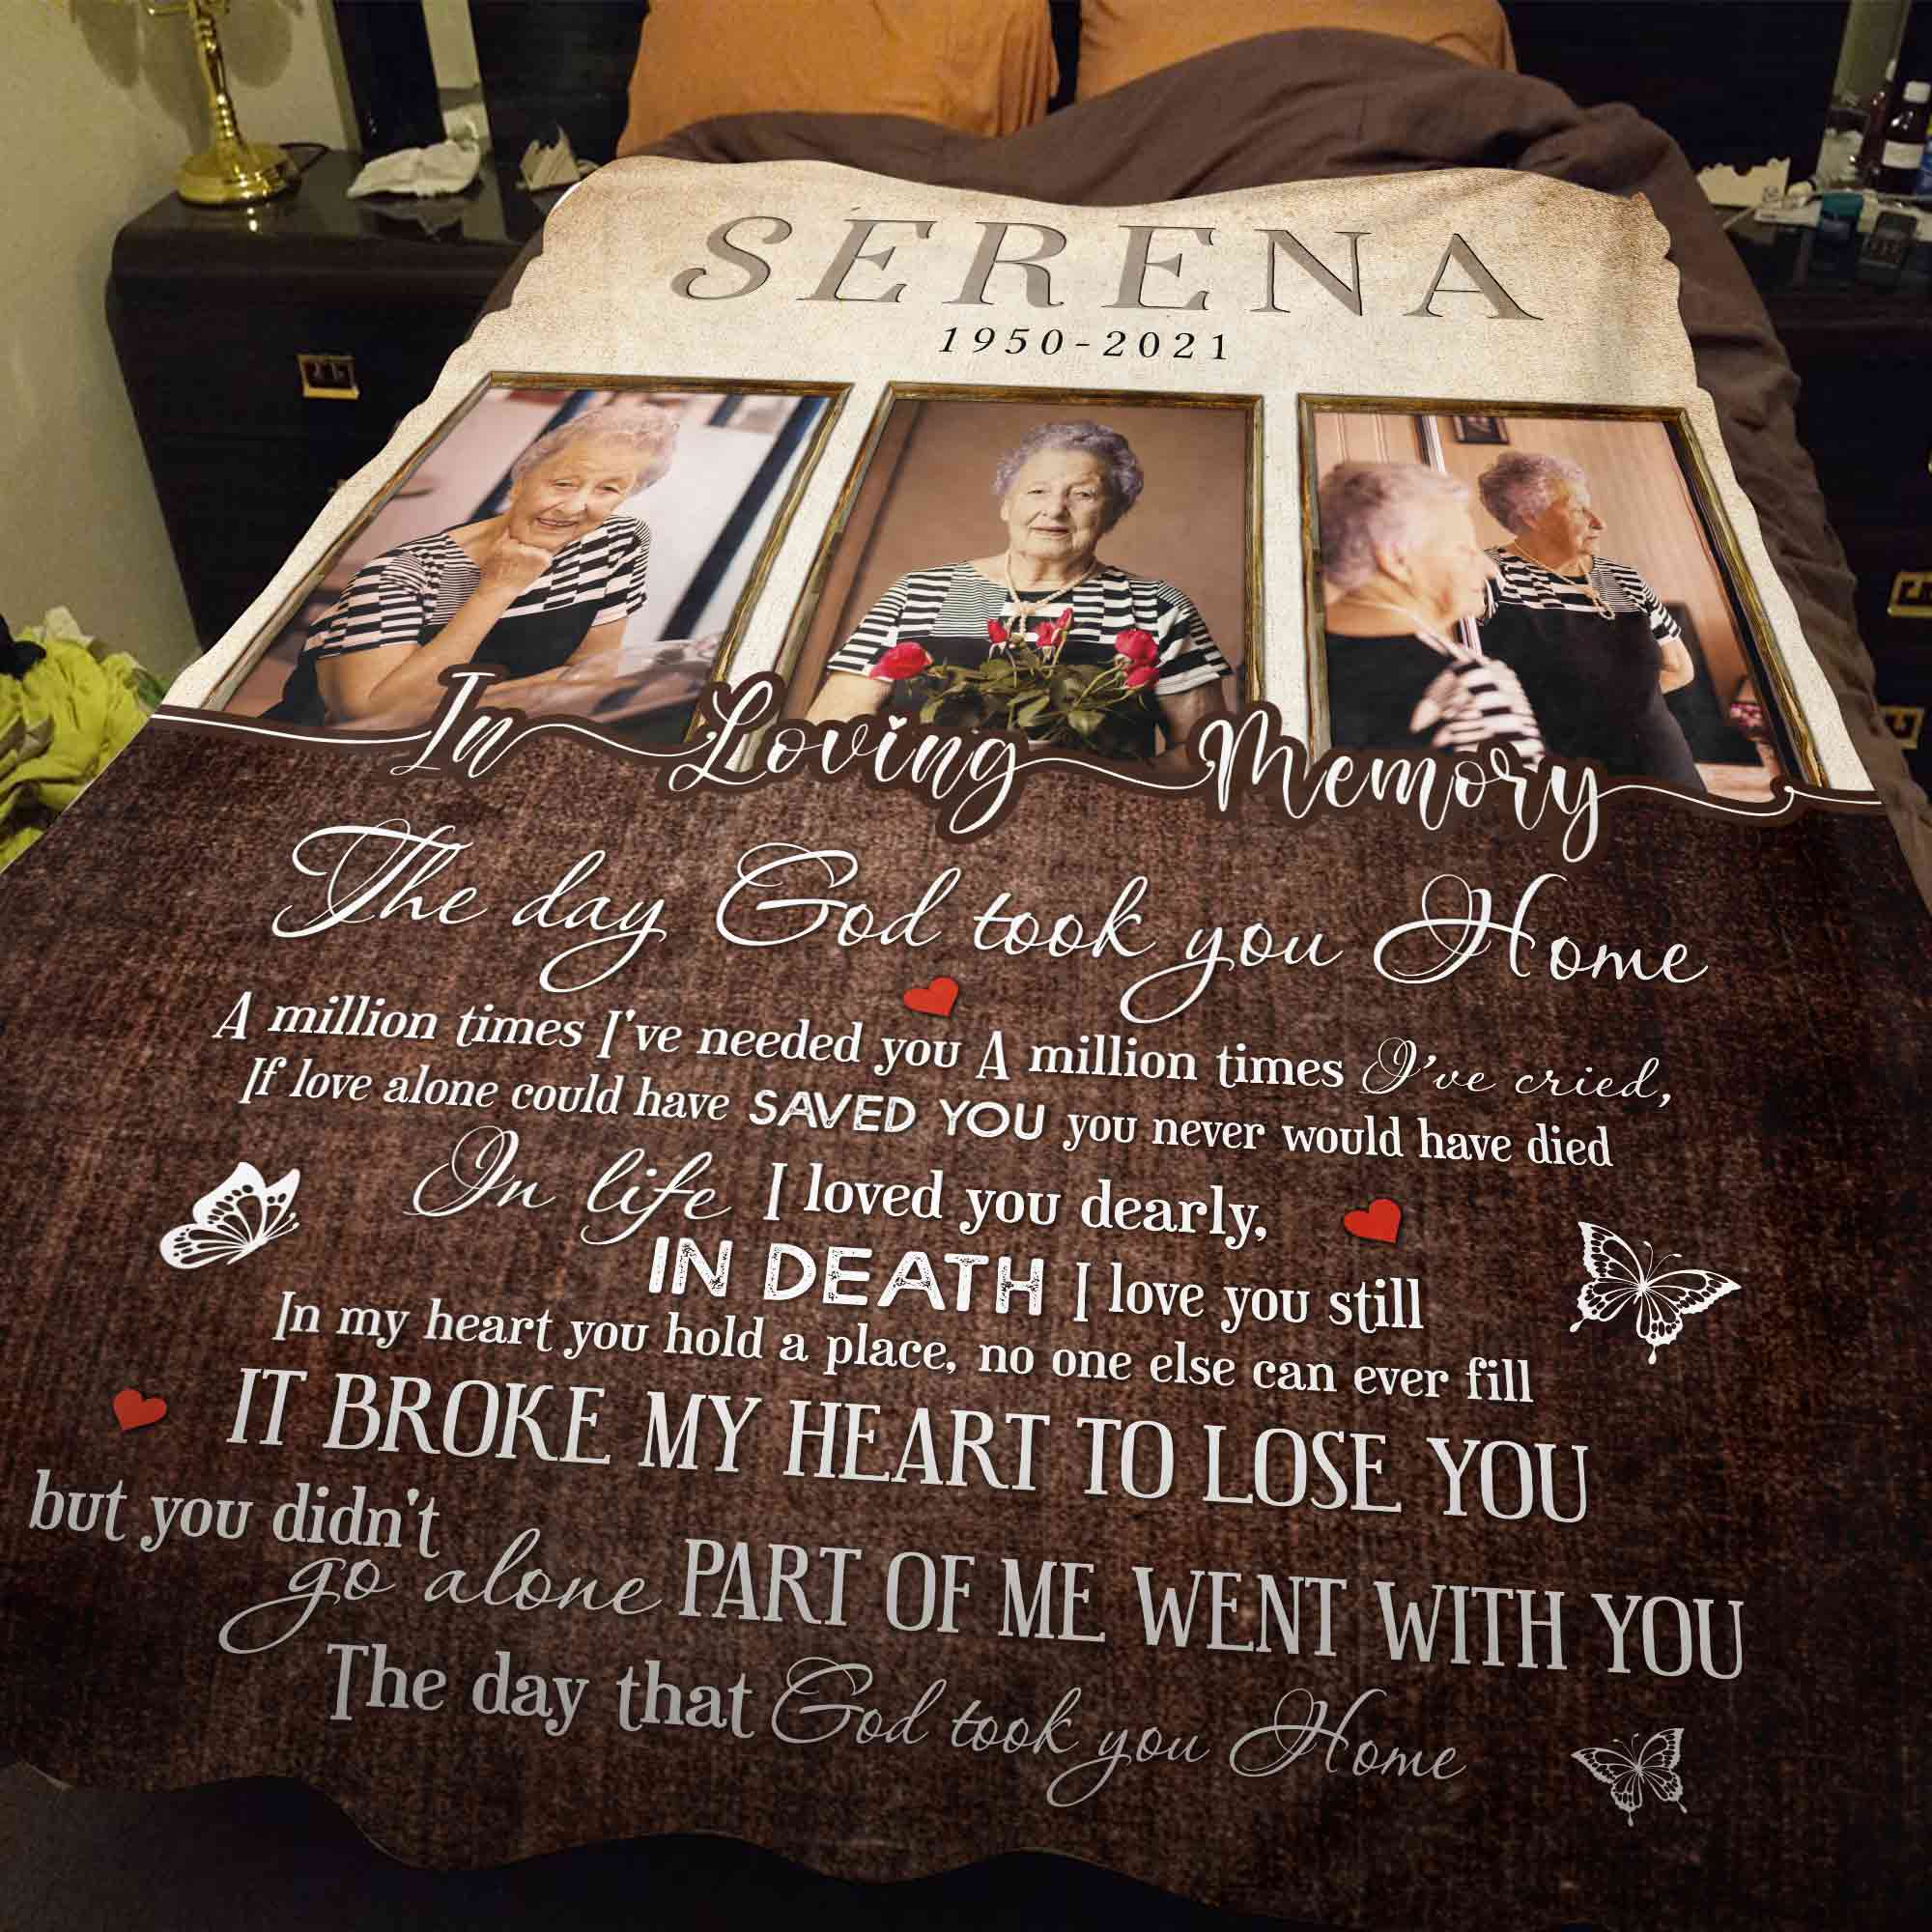 Memorial Blankets With Photo For Funerals, Memorial Gift Loss Of Mother, The Day God Took You Home, Remembrance Memorial Blankets